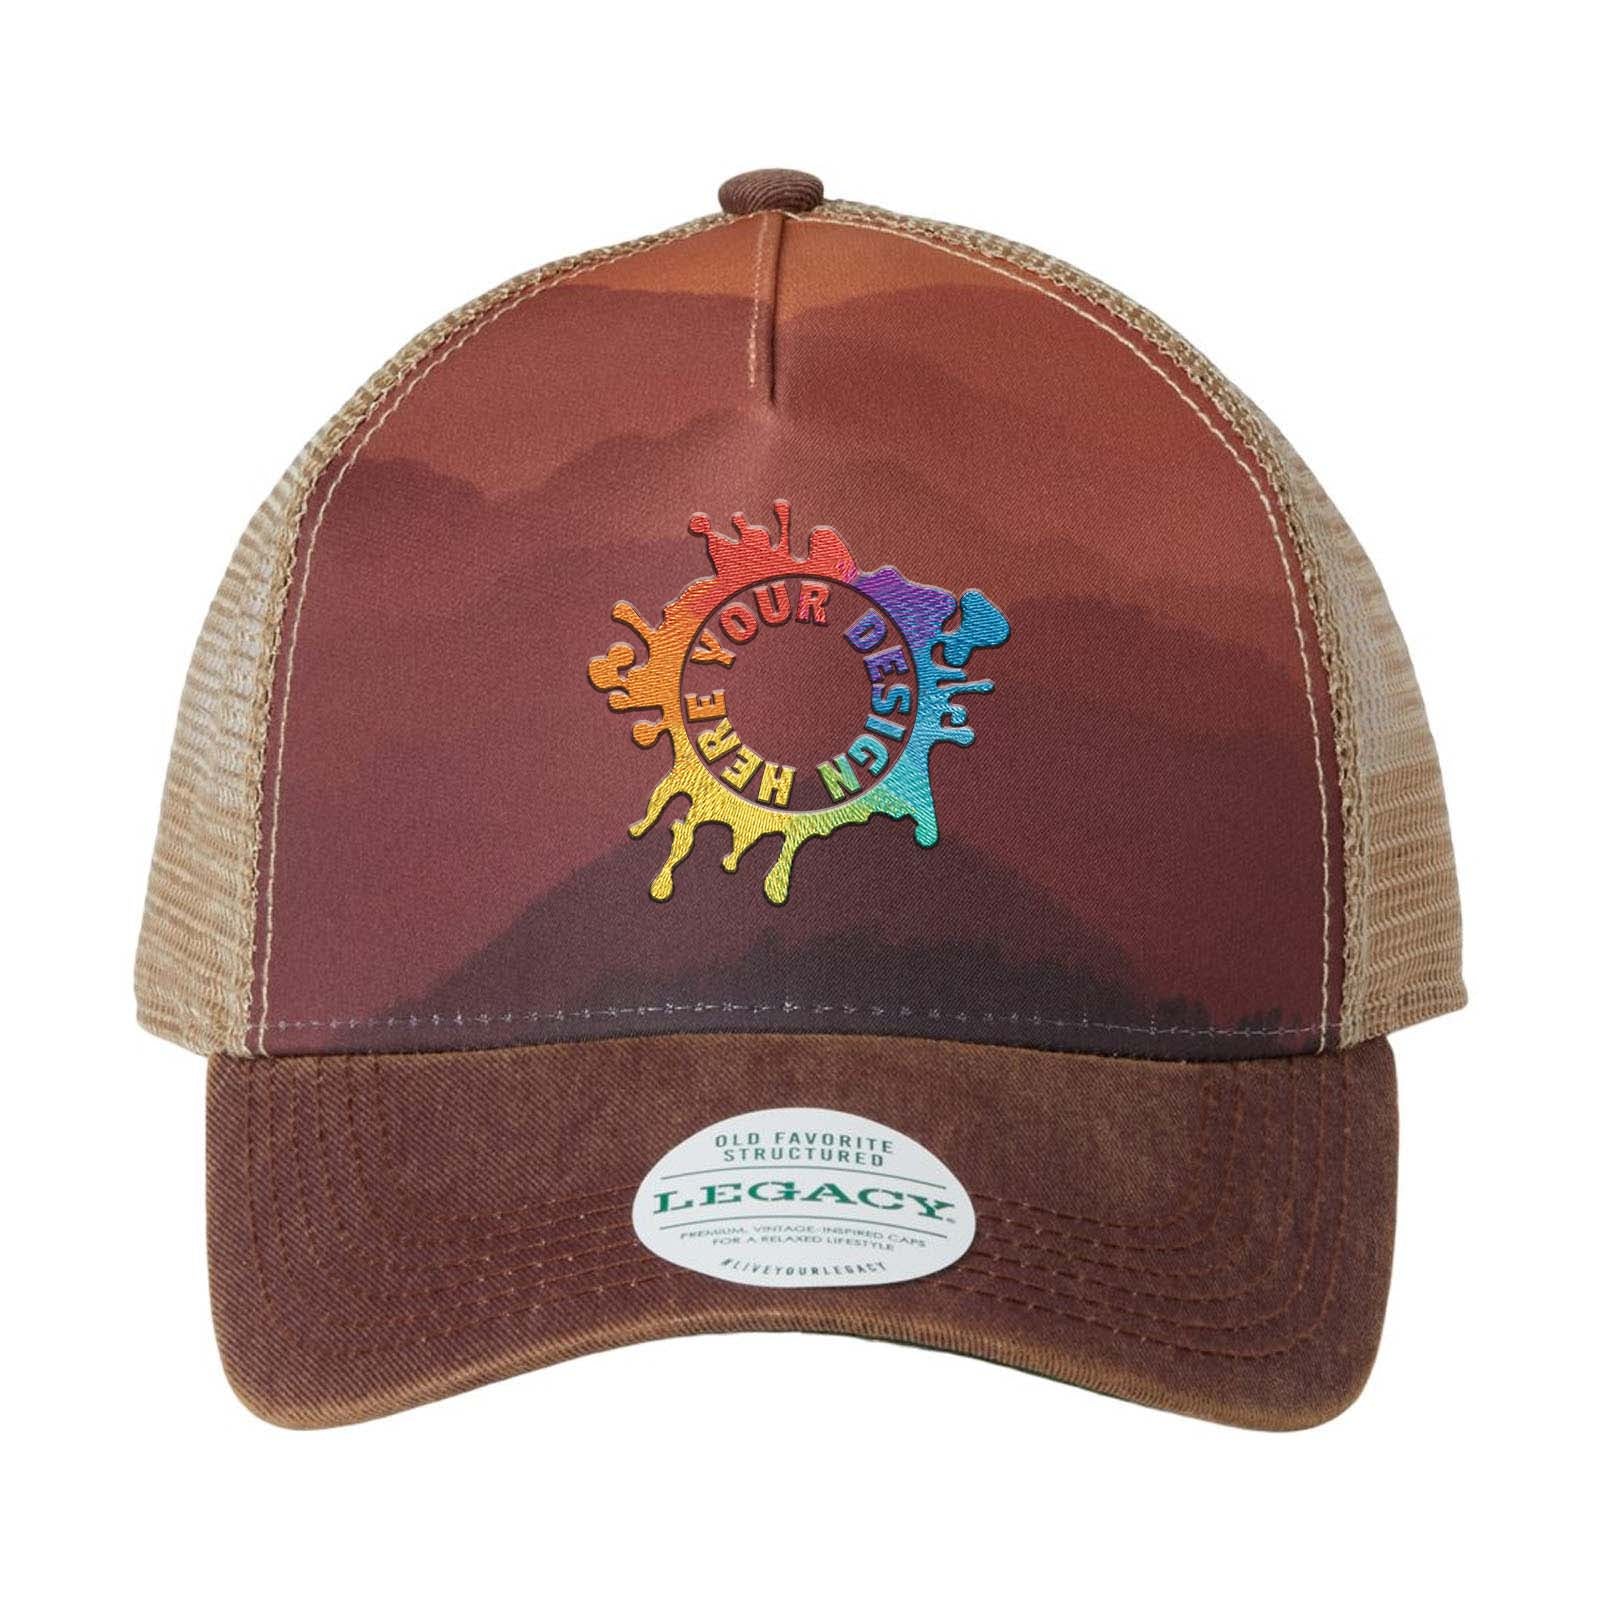 Embroidered LEGACY - Old Favorite Five-Panel Trucker Cap - Mato & Hash